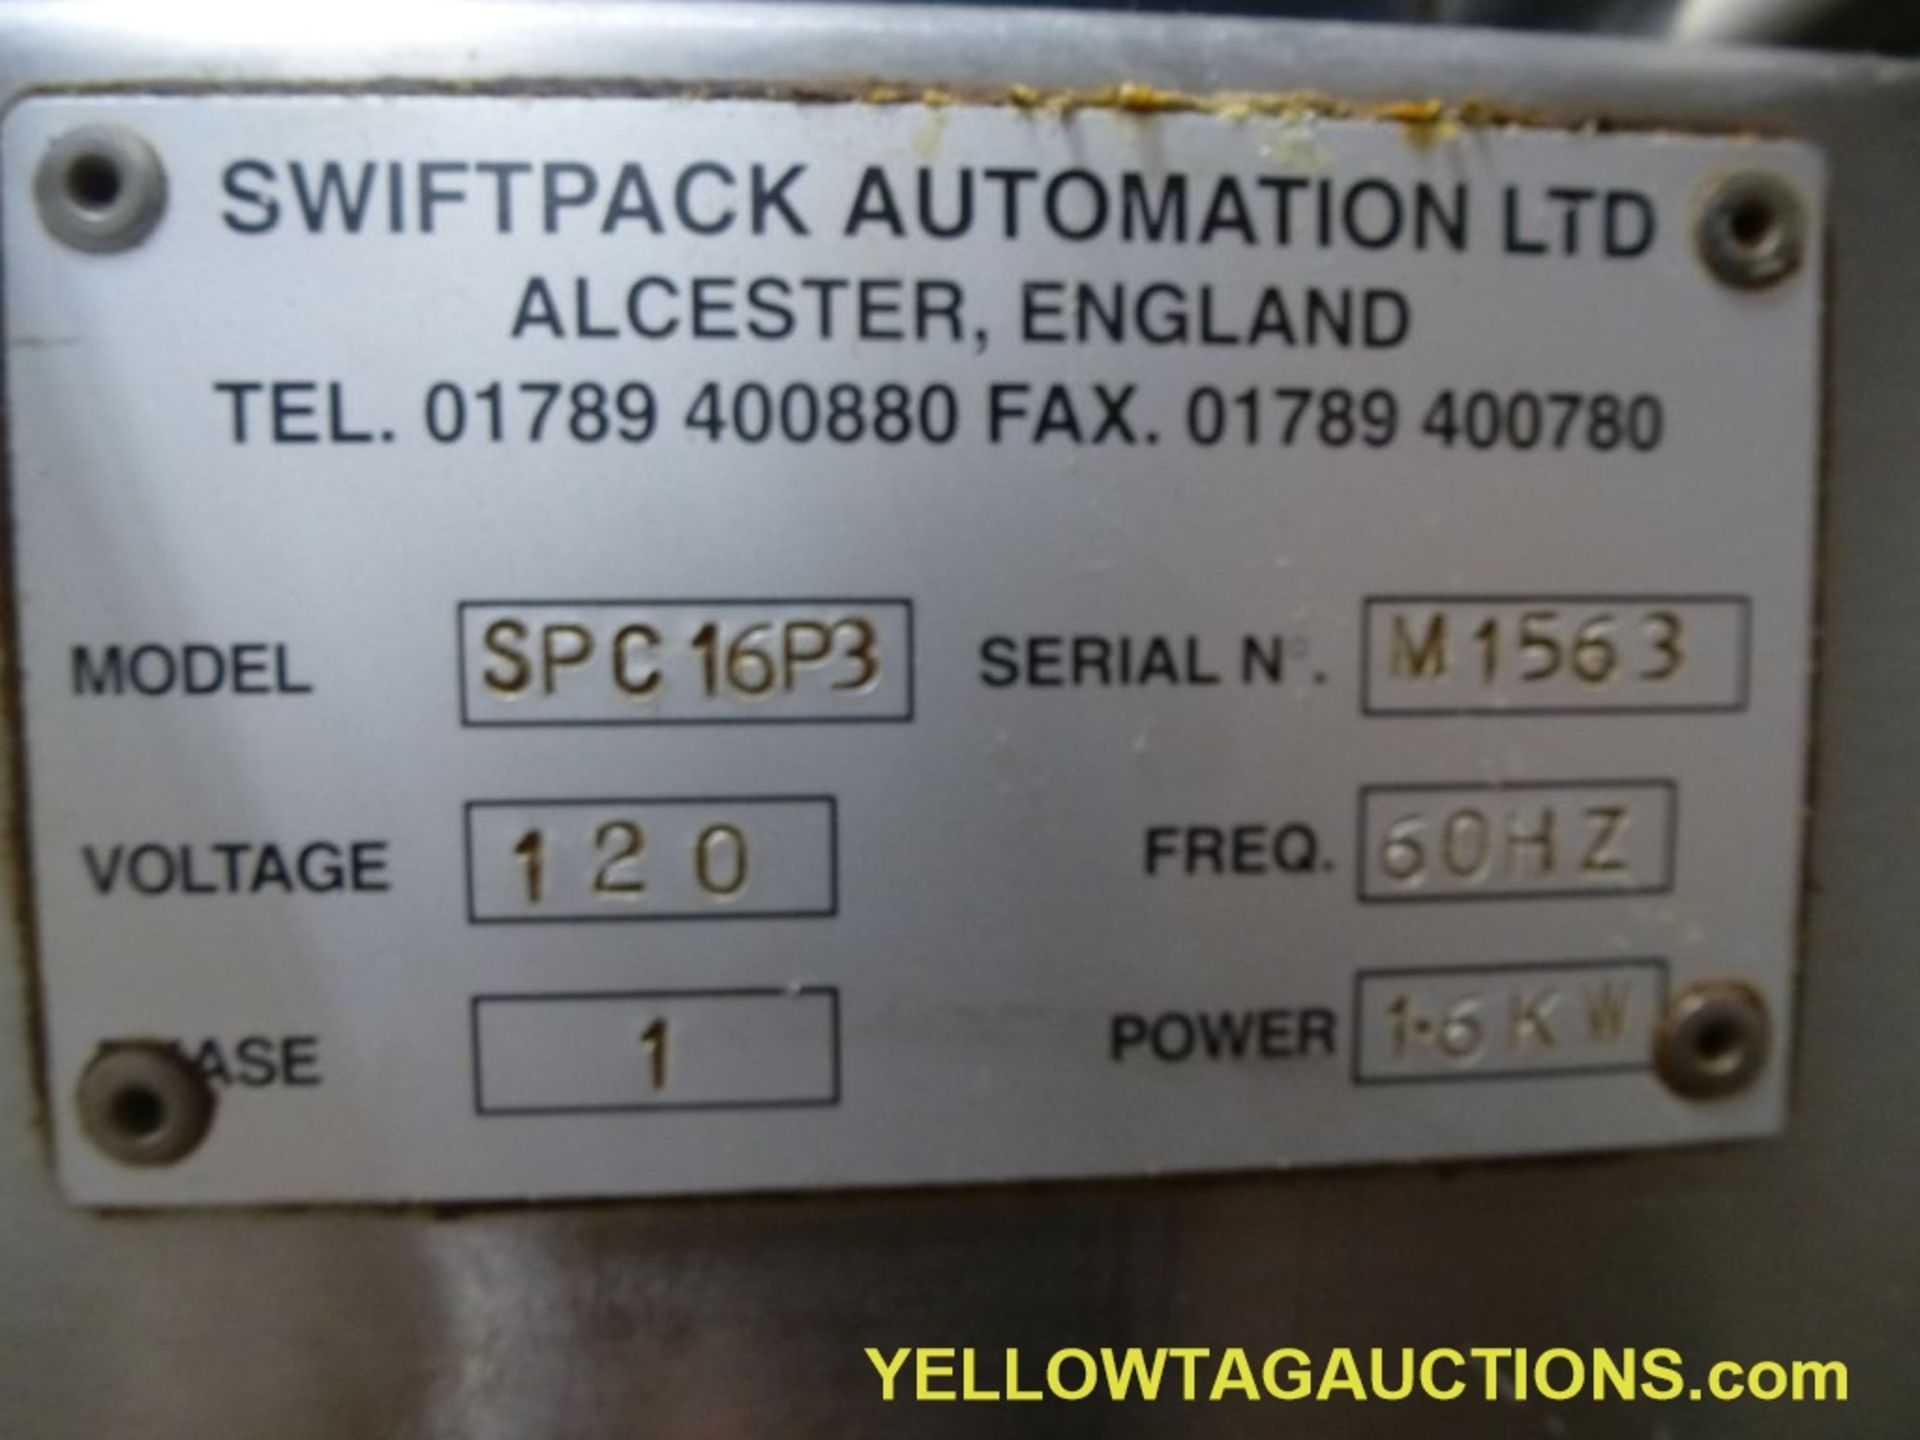 SwiftPack Automation Vibratory Feeder|Model No. SPC16P3; 120V; 1-Phase; 16 KW; 10A|Lot Loading - Image 14 of 14